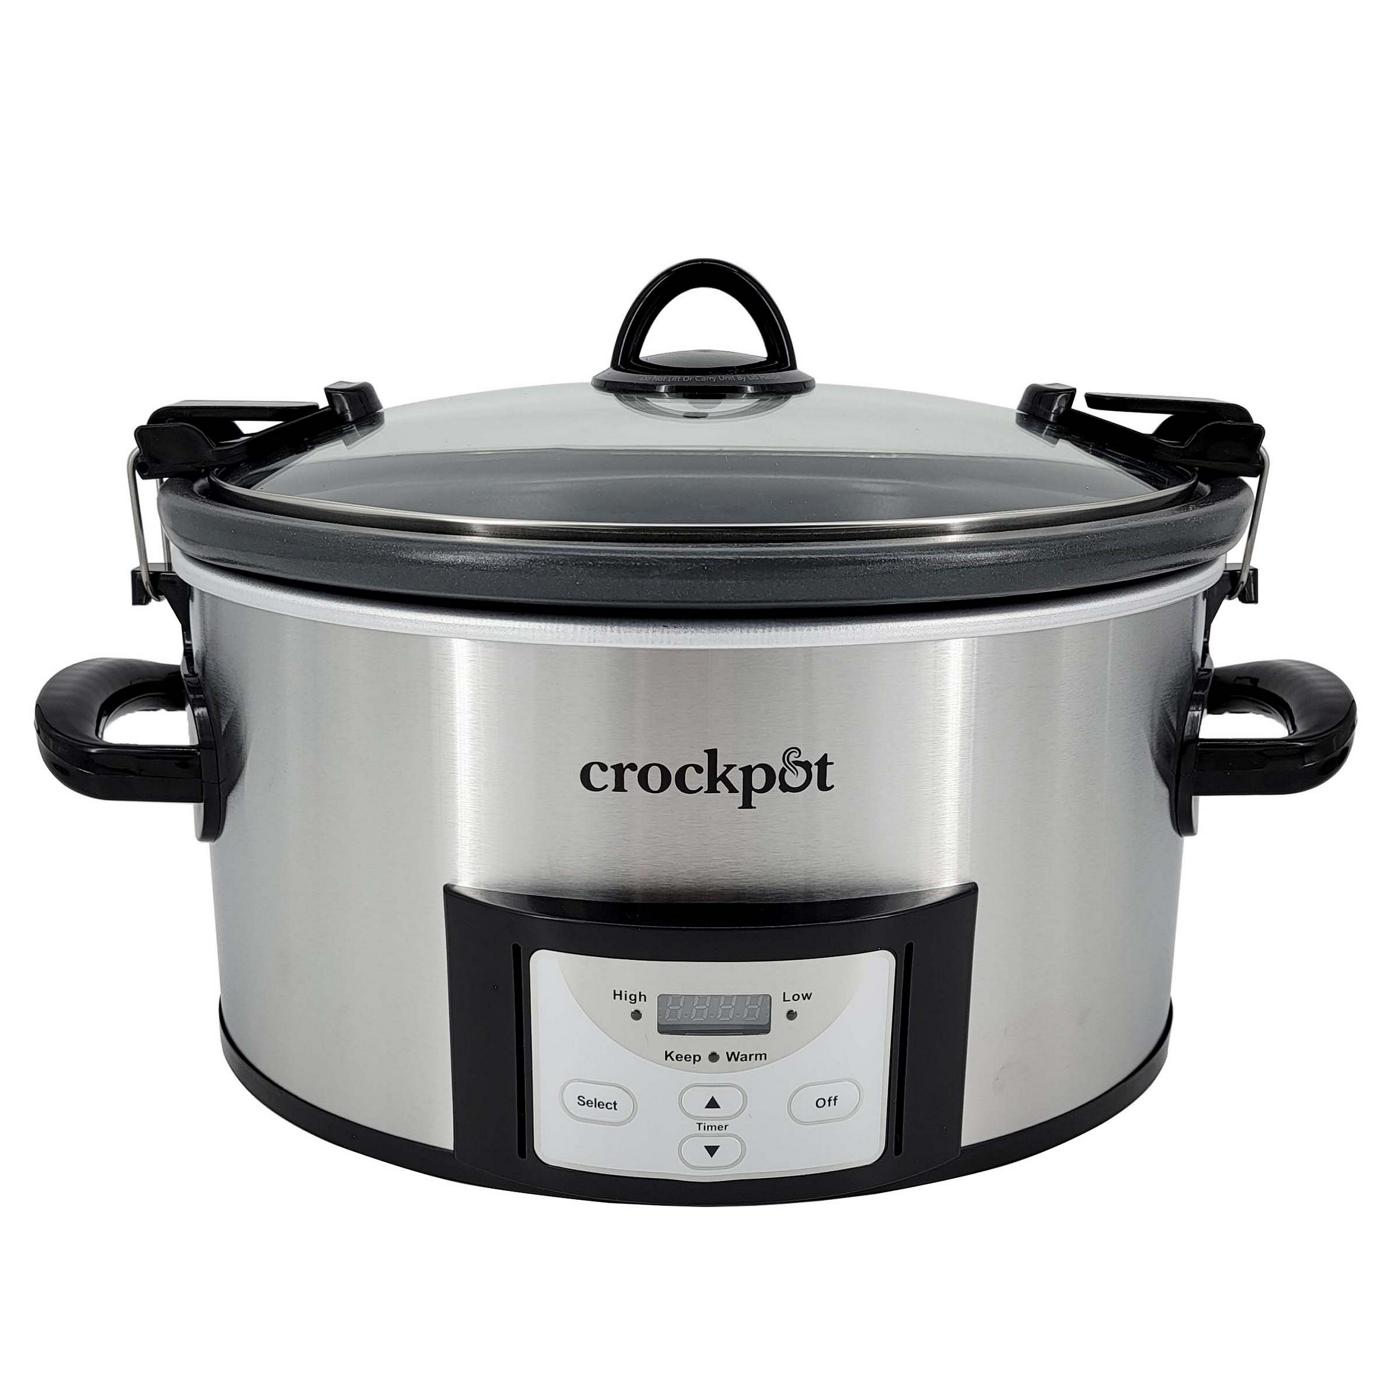 Crock Pot Cook & Carry Stainless Steel Programmable Slow Cooker